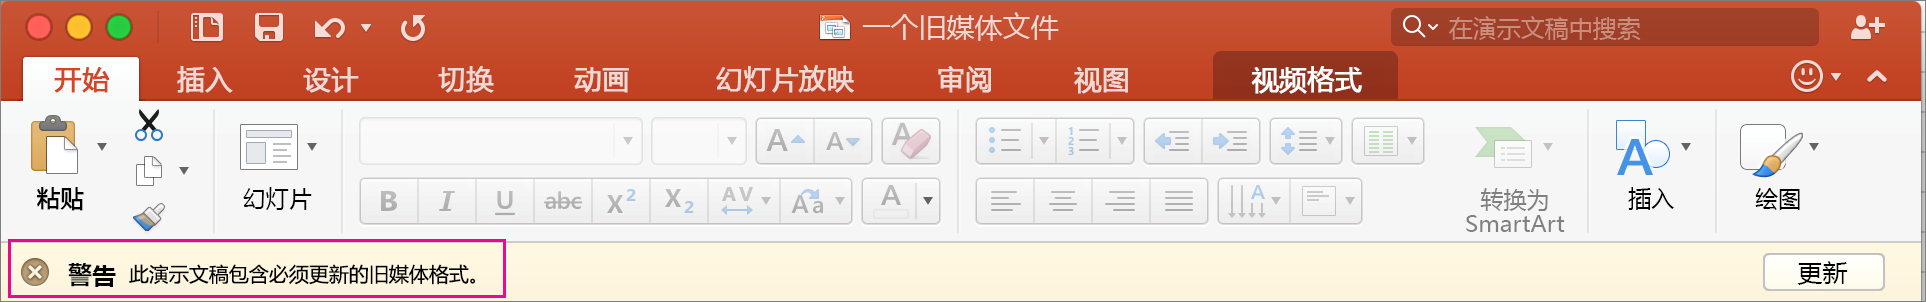 PowerPoint 2016 for Mac 旧媒体格式